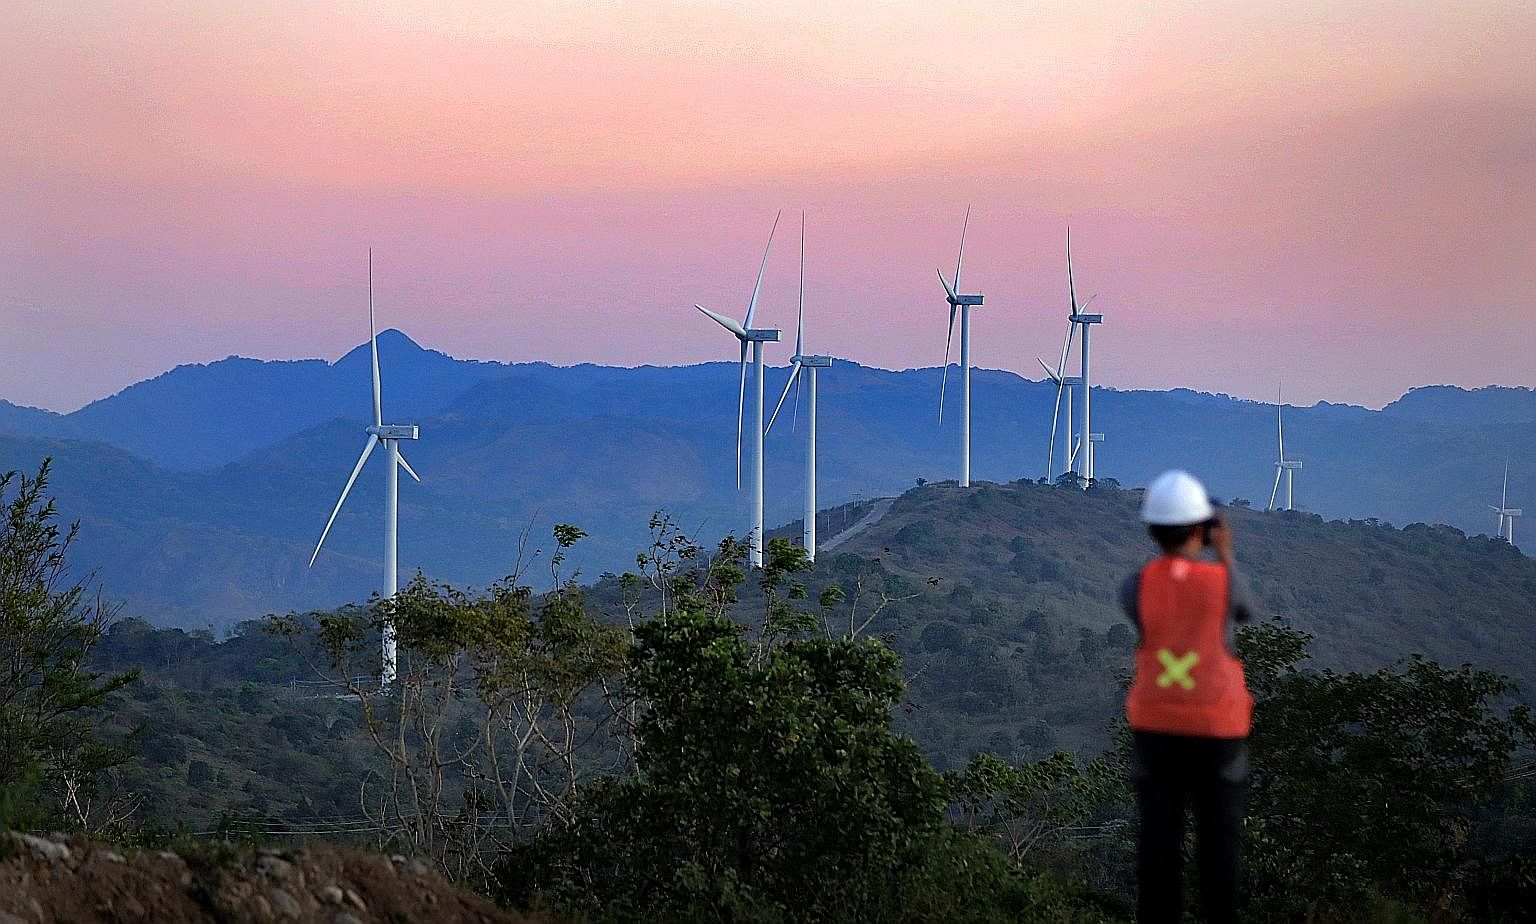 Wind turbines in South Sulawesi, Indonesia. The rapid advancements in science and innovation have opened up many new possibilities to pursue sustainable development, says Deputy Prime Minister Heng Swee Keat.